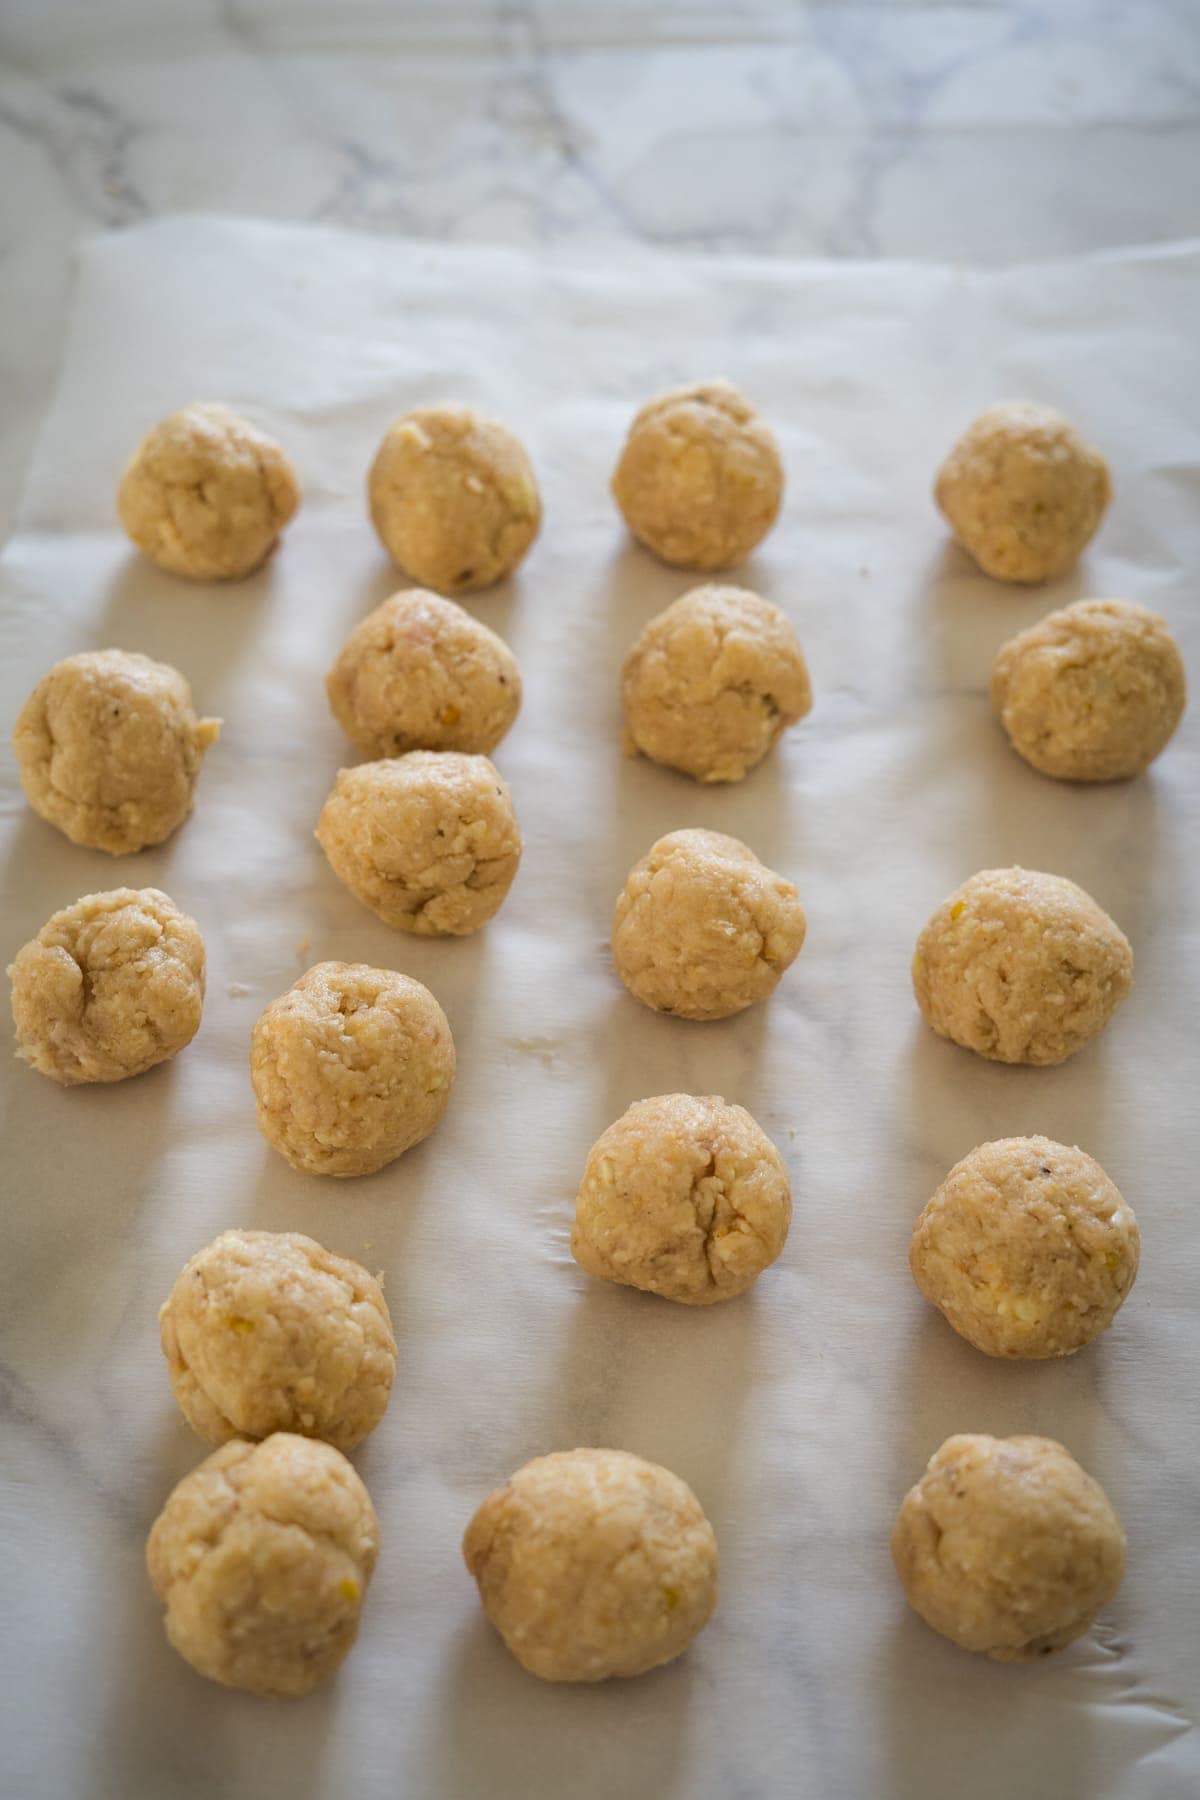 Chicken piccata meatballs neatly arranged on parchment paper.